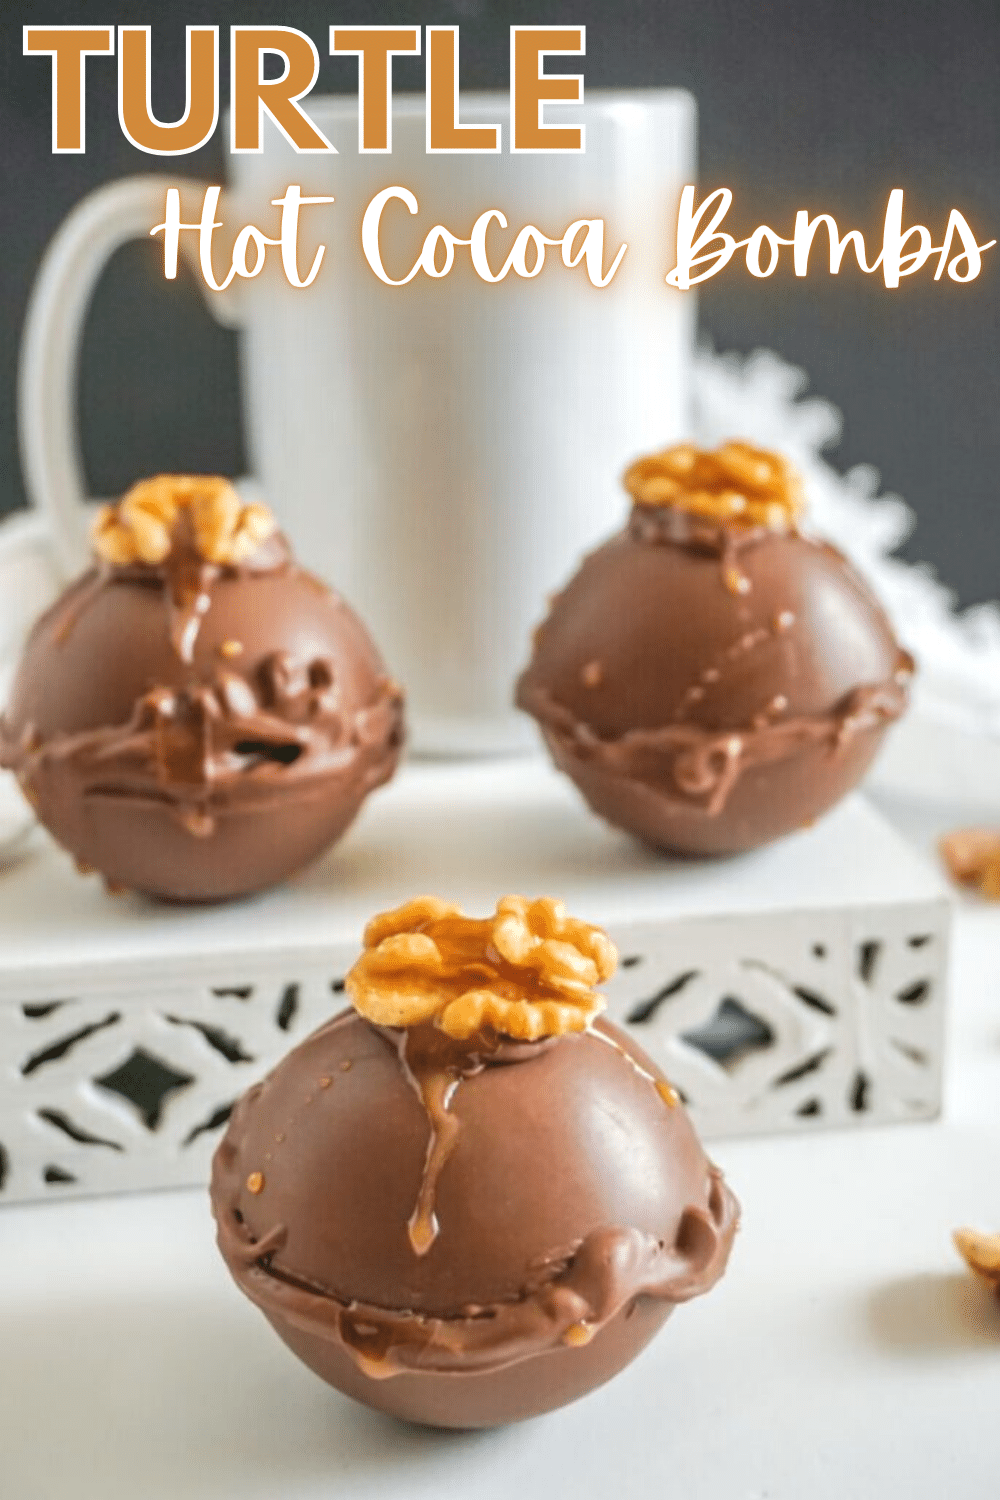 These Turtle Hot Cocoa Bombs are a delight. With the walnut & caramel on top, & the flavor of the added ingredients, the taste is spot on! #hotcocoabombs #hotcocoa #turtlechocolates #dessert #recipe via @wondermomwannab